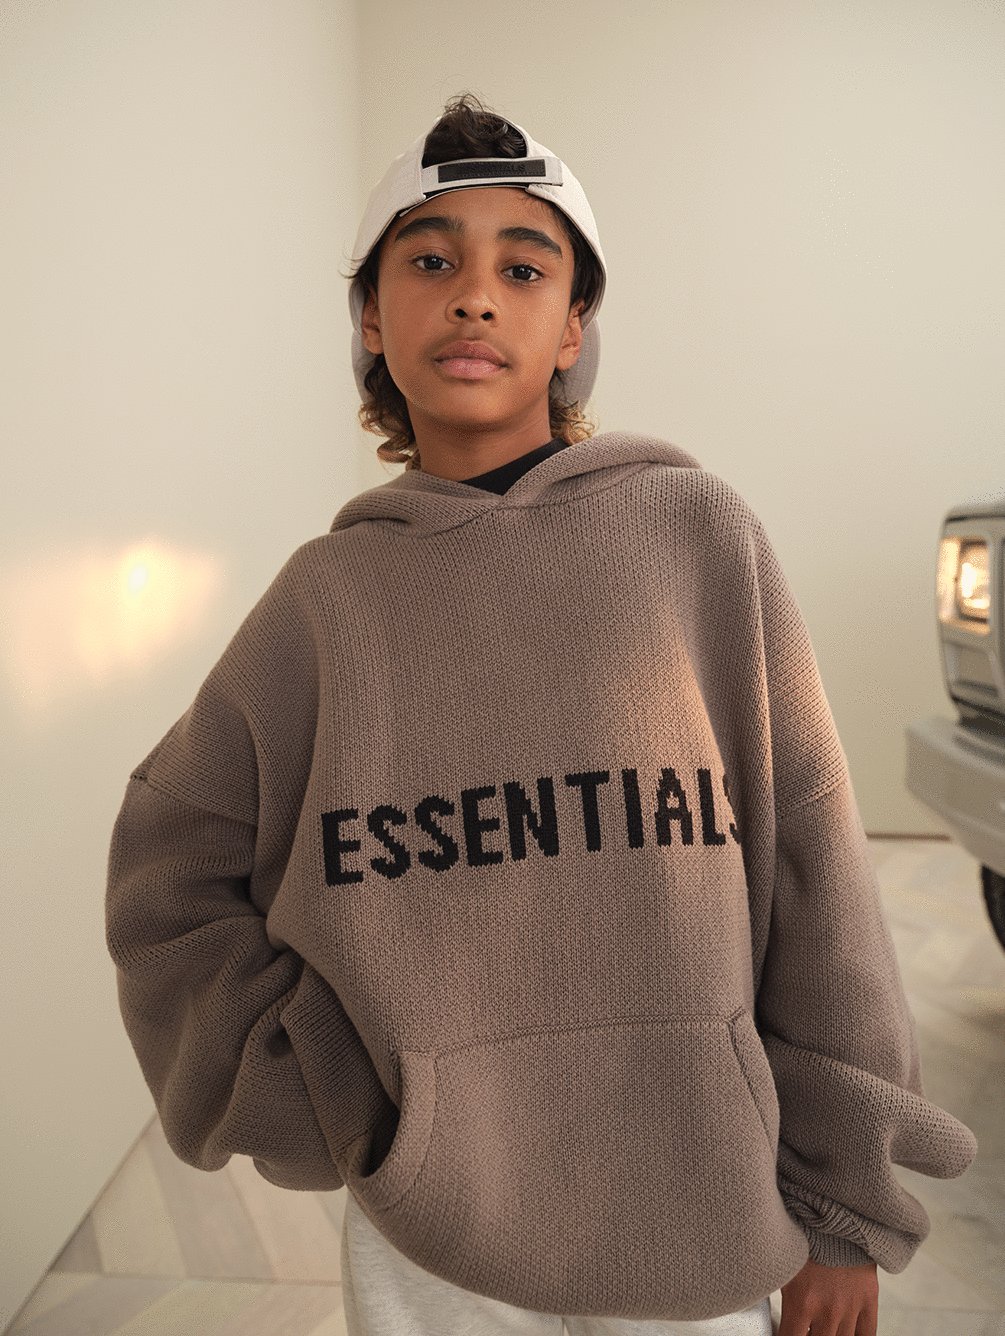 FEAR OF GOD ESSENTIALS - Shaniqwa Jarvis | 11th House Agency